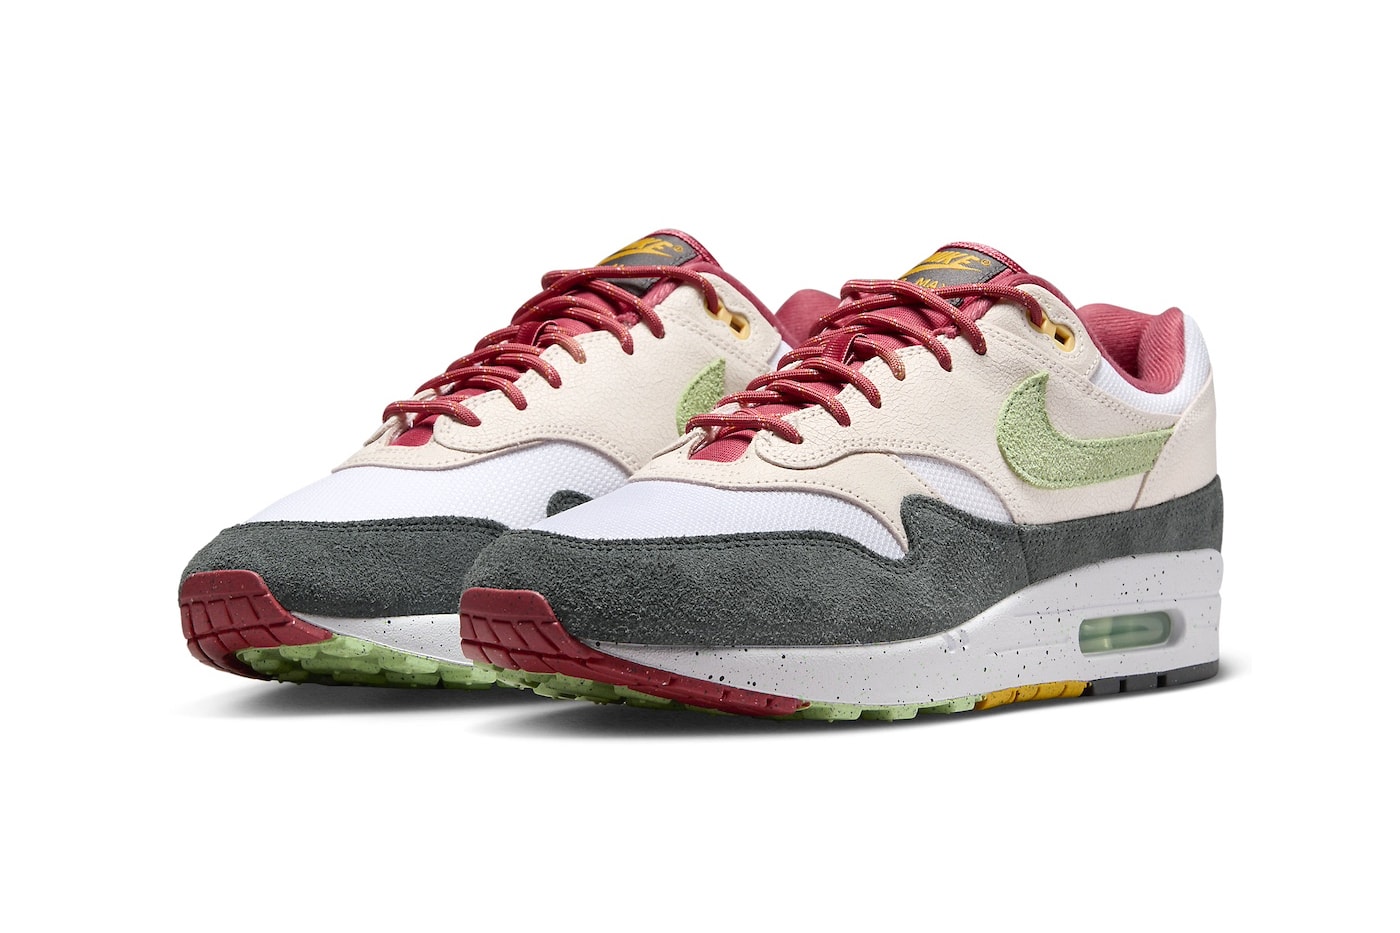 Nike Air Max 1 Surfaces in Mixed Pastels FZ4133-640 Light Soft Pink/Vapor Green-Anthracite swoosh